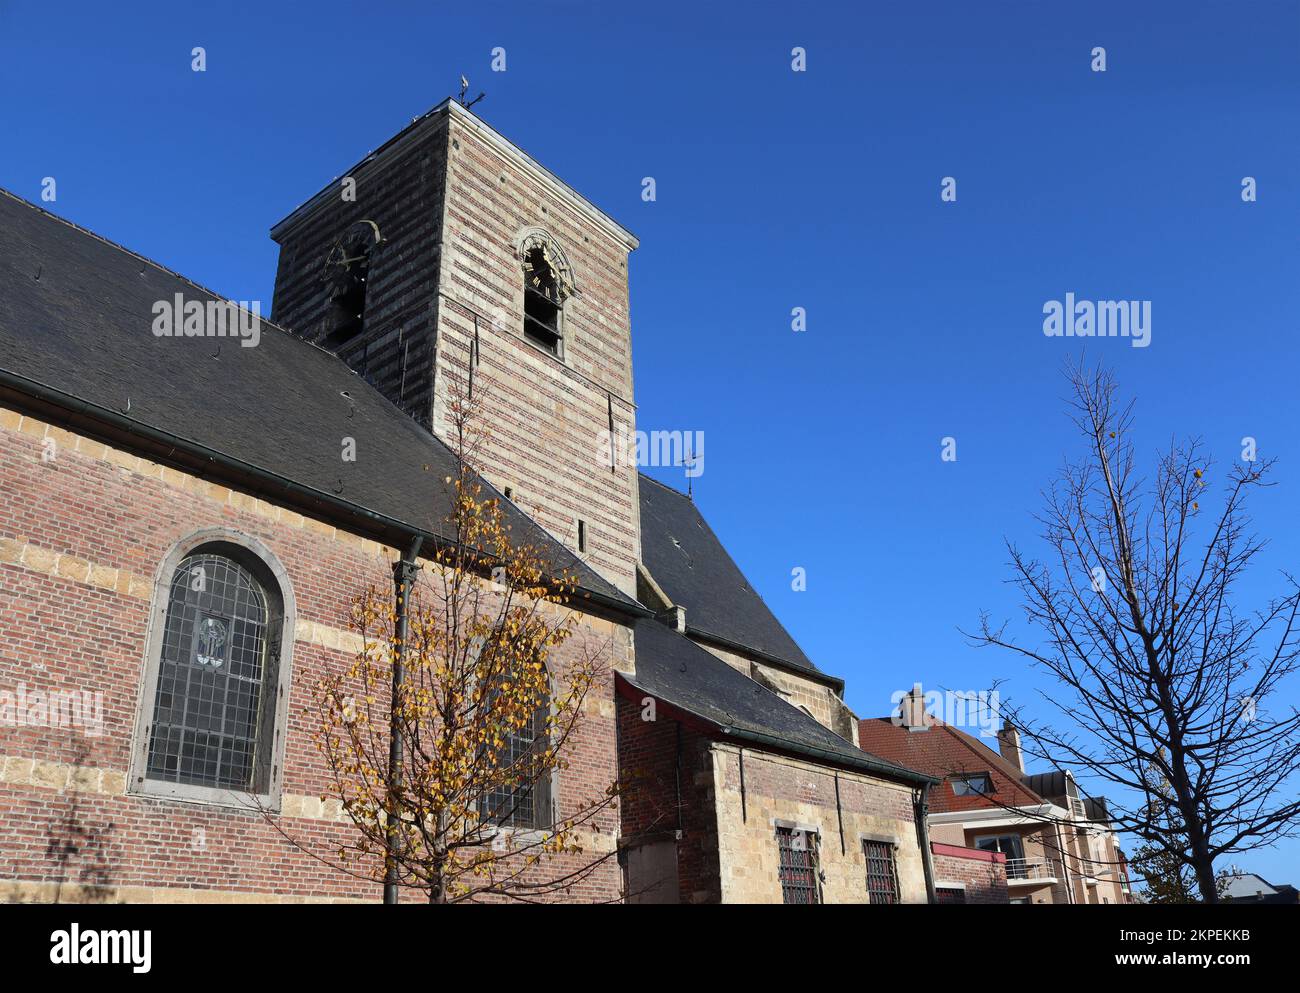 View of the historic Our Lady's parish church in Nieuwerkerken near Aalst in East Flanders, Belgium. Sunny autumn day with clear sky, and copy space a Stock Photo